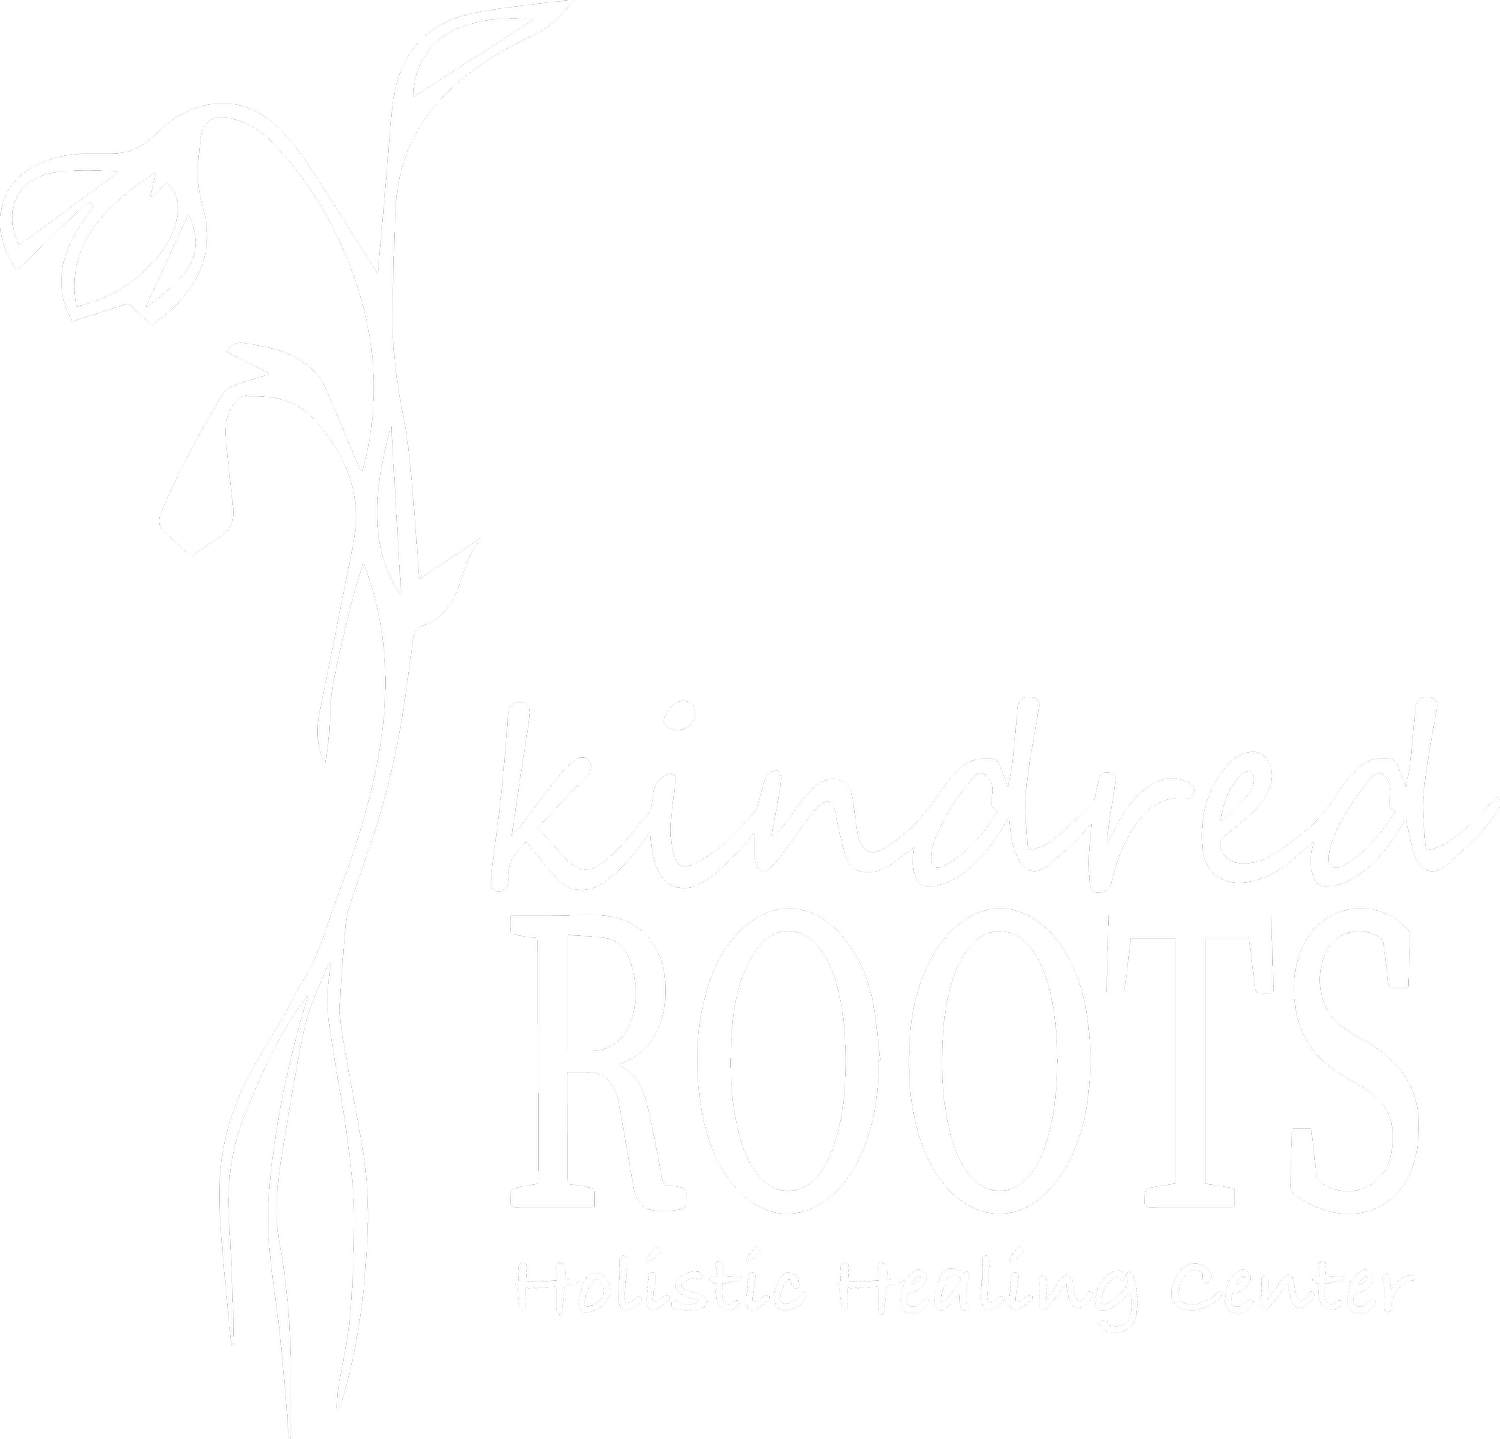 Kindred Roots Holistic Healing